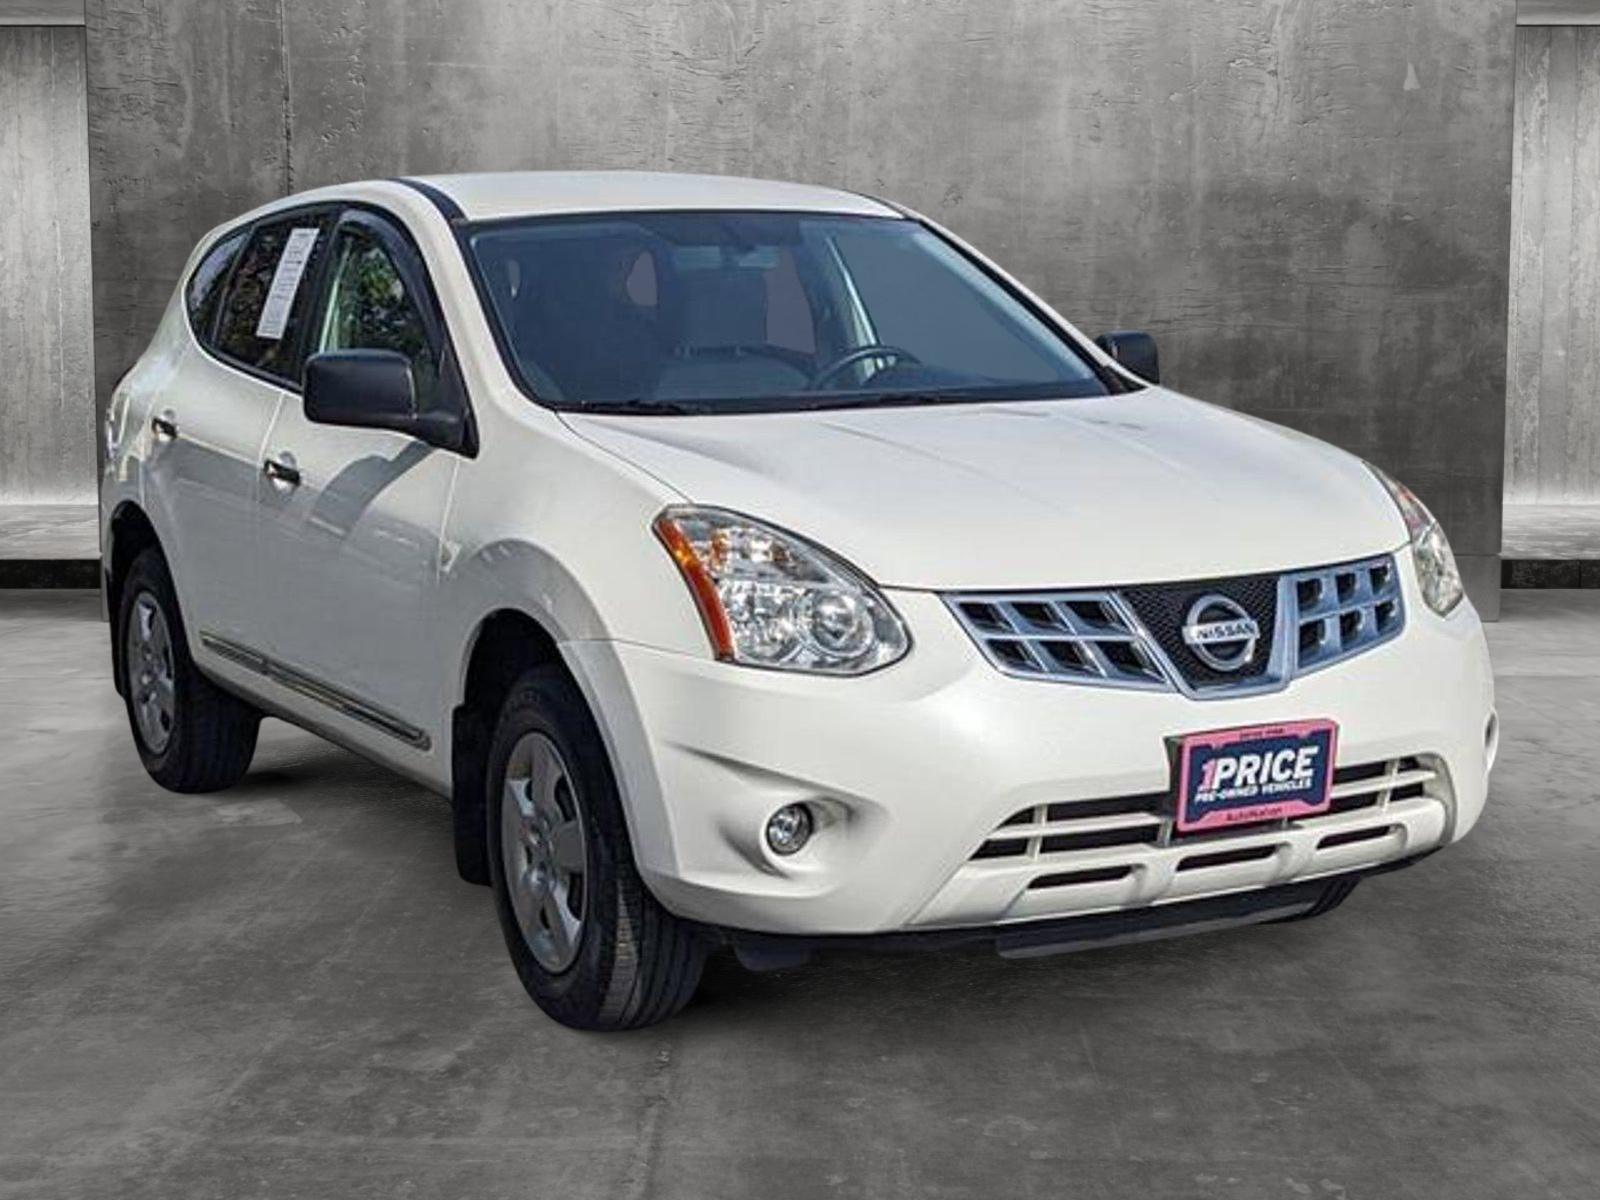 2013 Nissan Rogue Vehicle Photo in CLEARWATER, FL 33764-7163